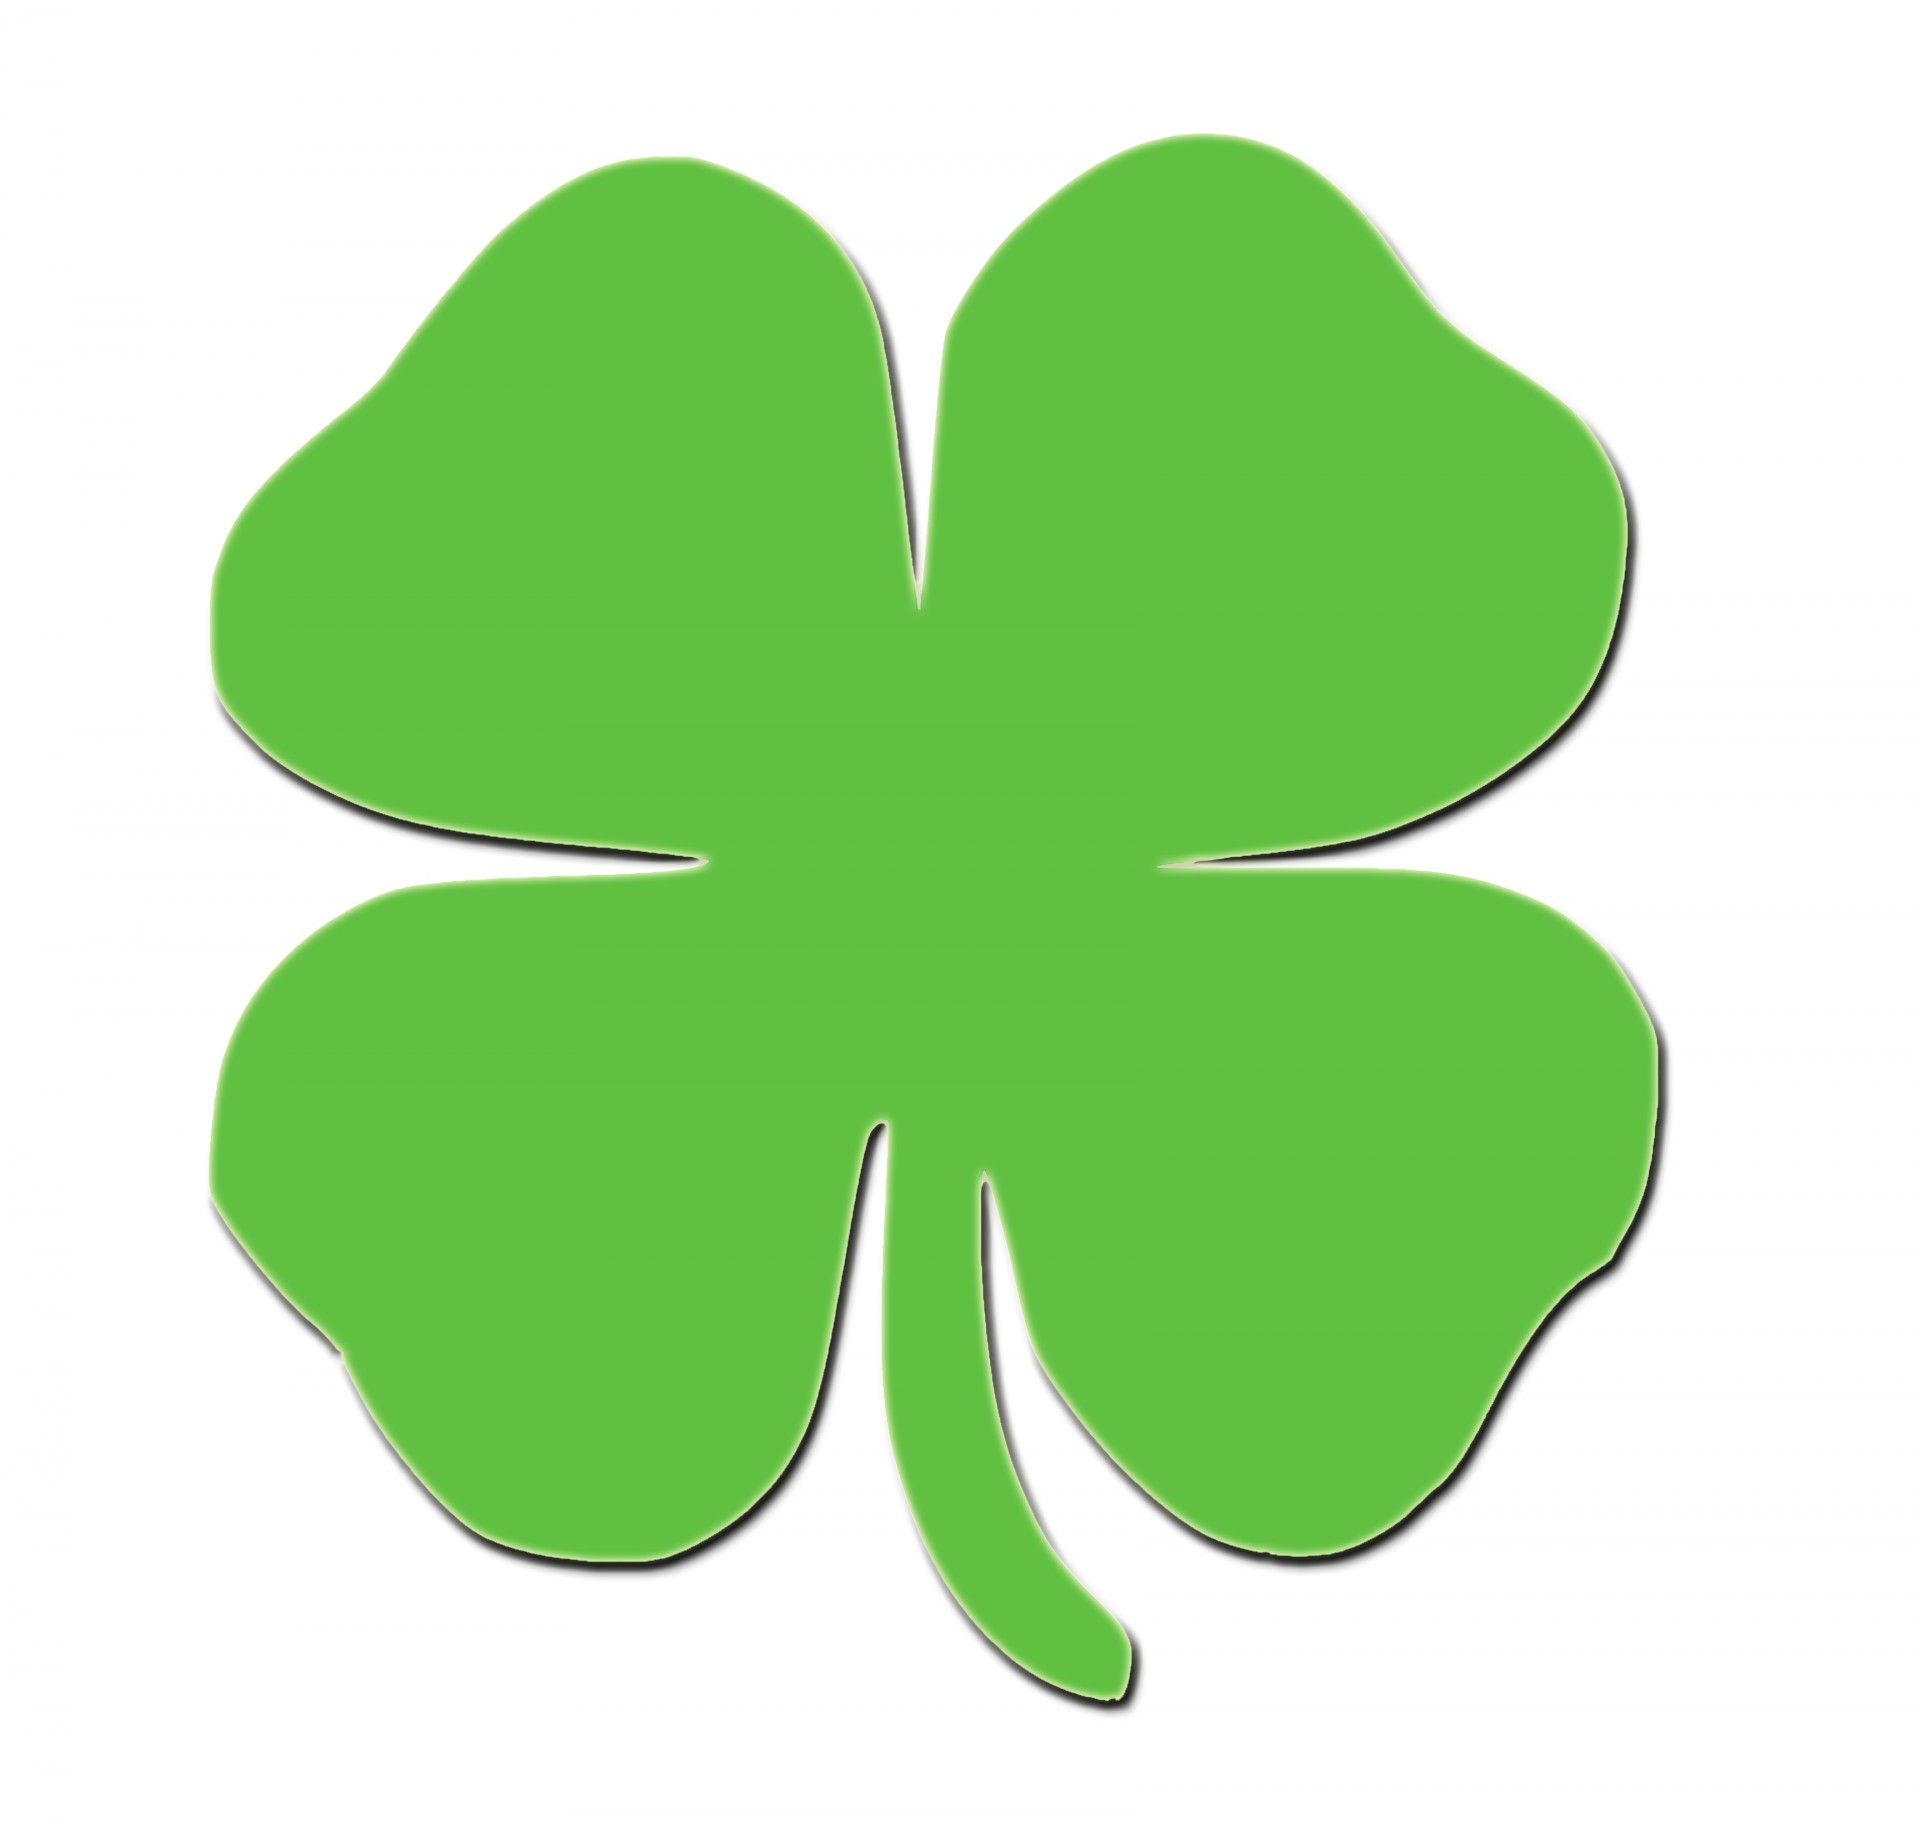 shamrock-for-st-patrick-s-day-free-stock-photo-public-domain-pictures